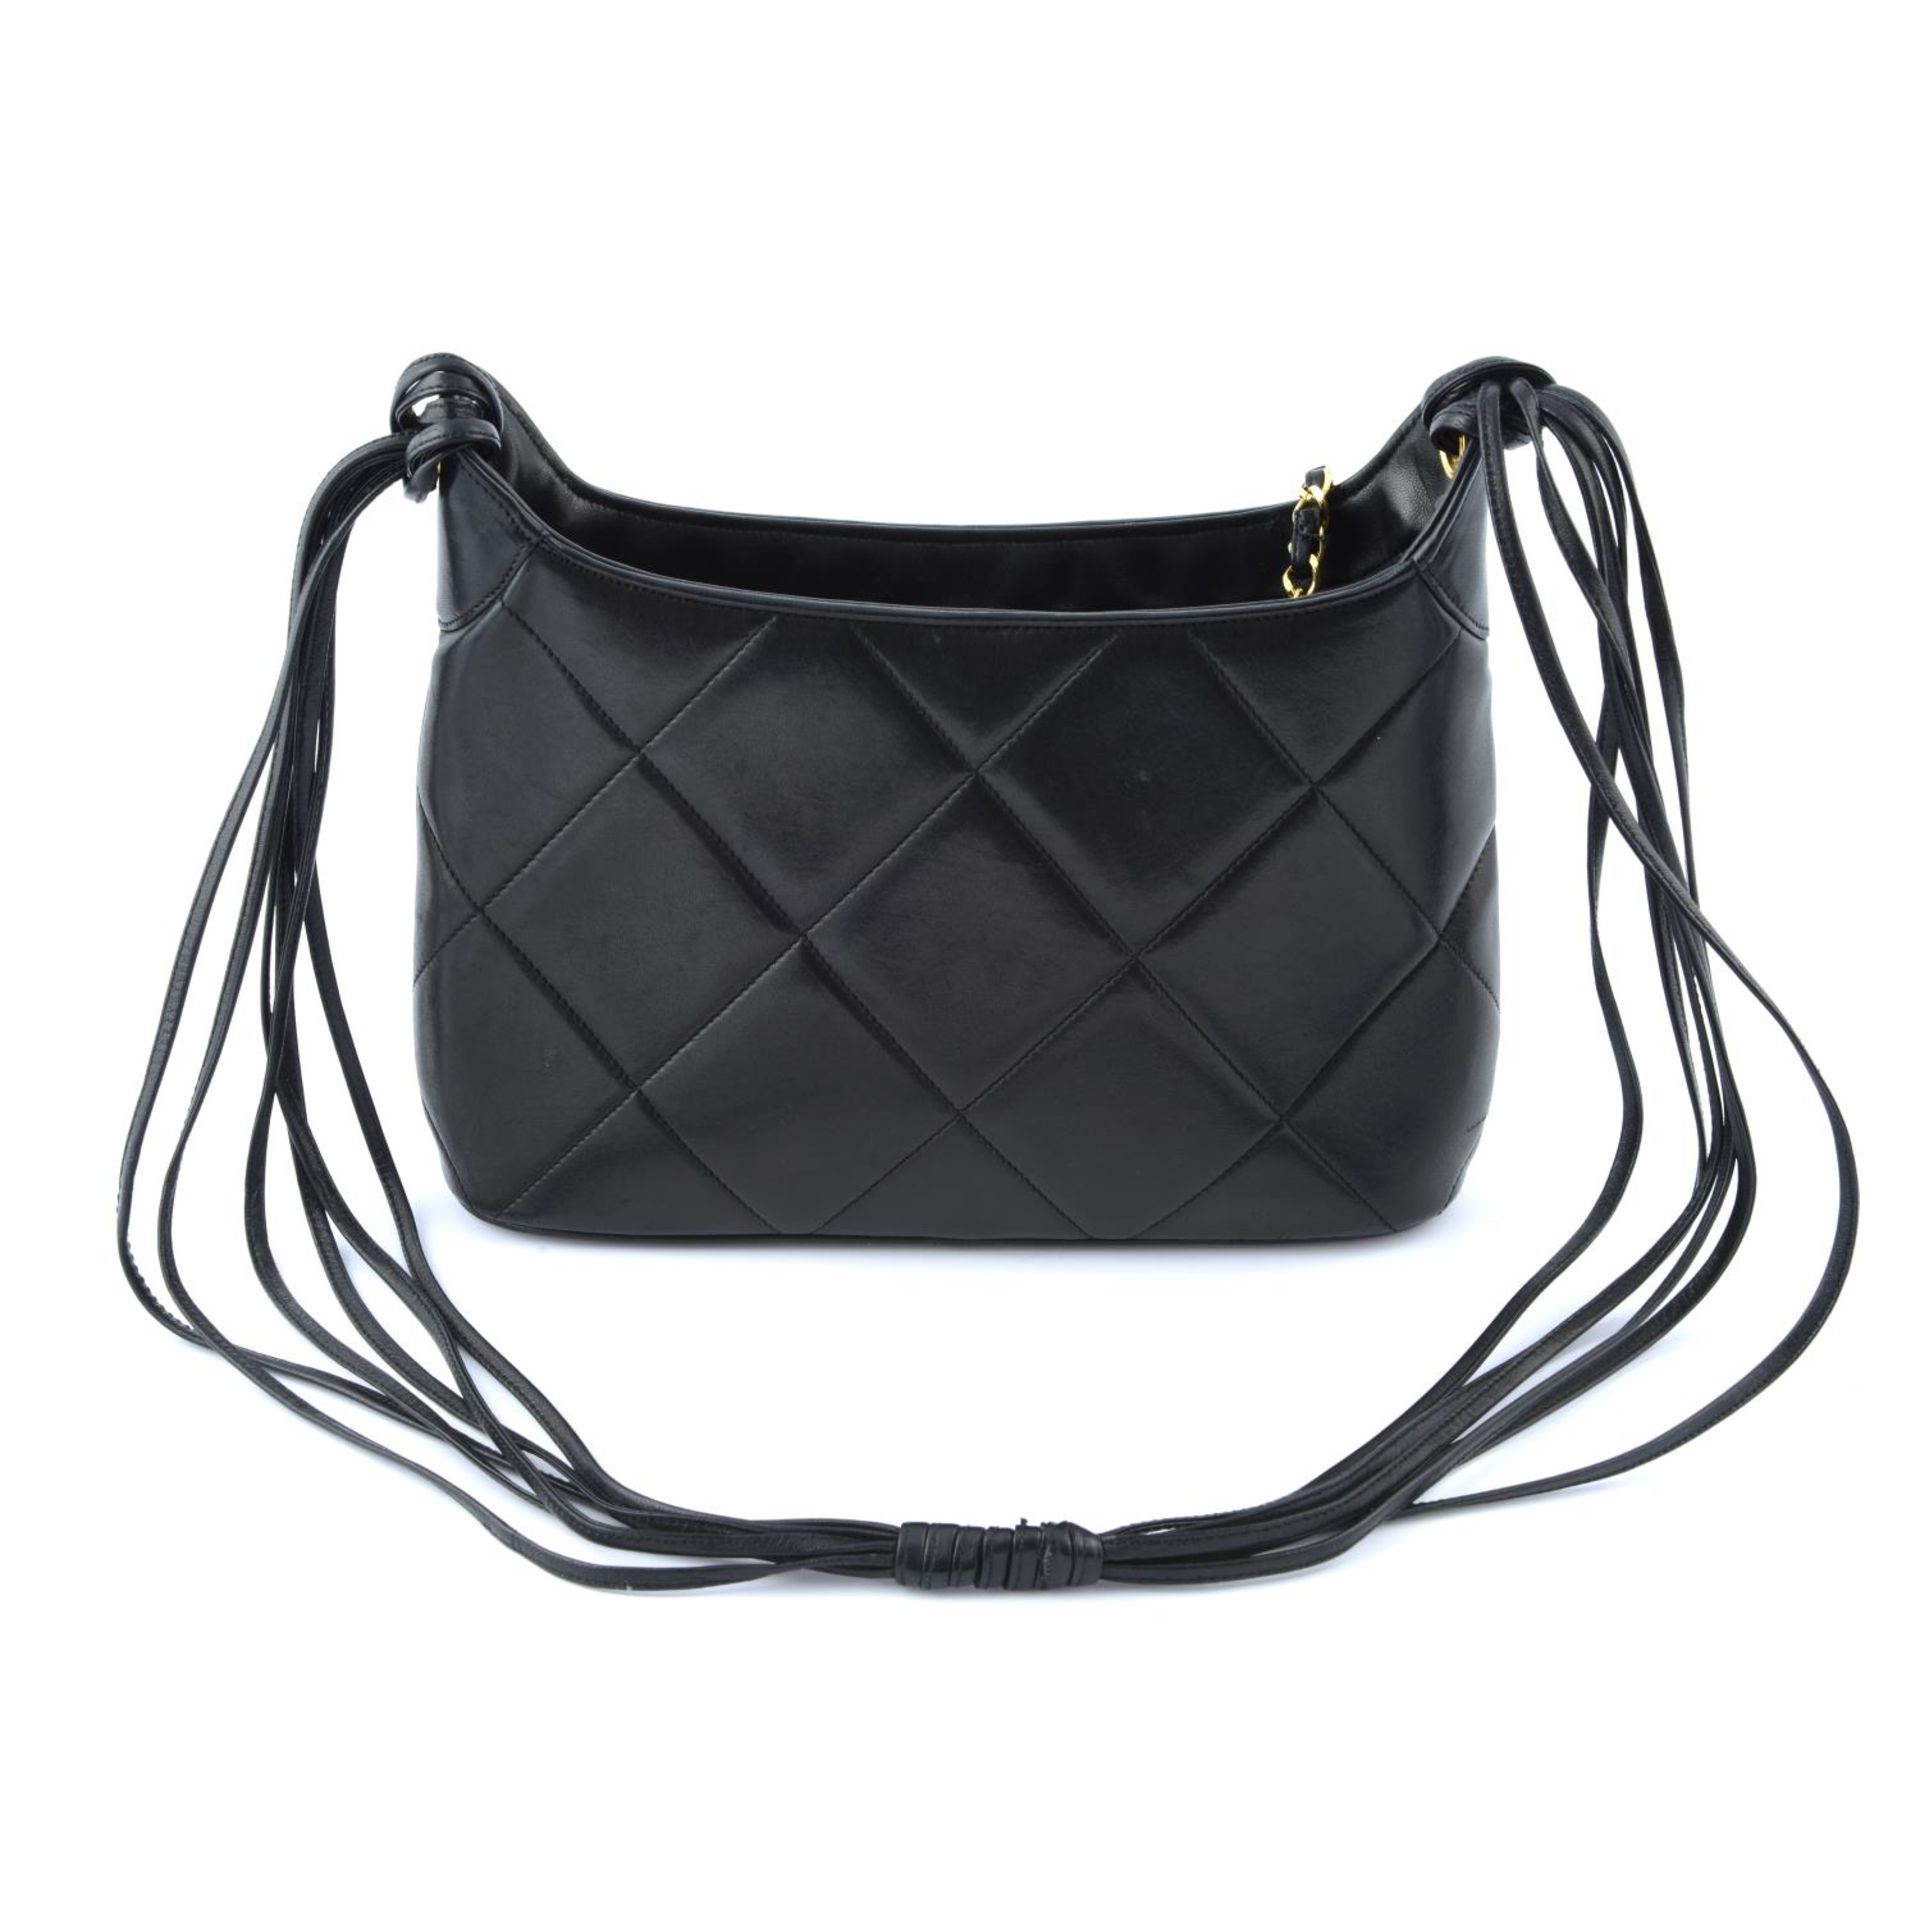 CHANEL - a black diamond quilted leather handbag. - Image 2 of 5